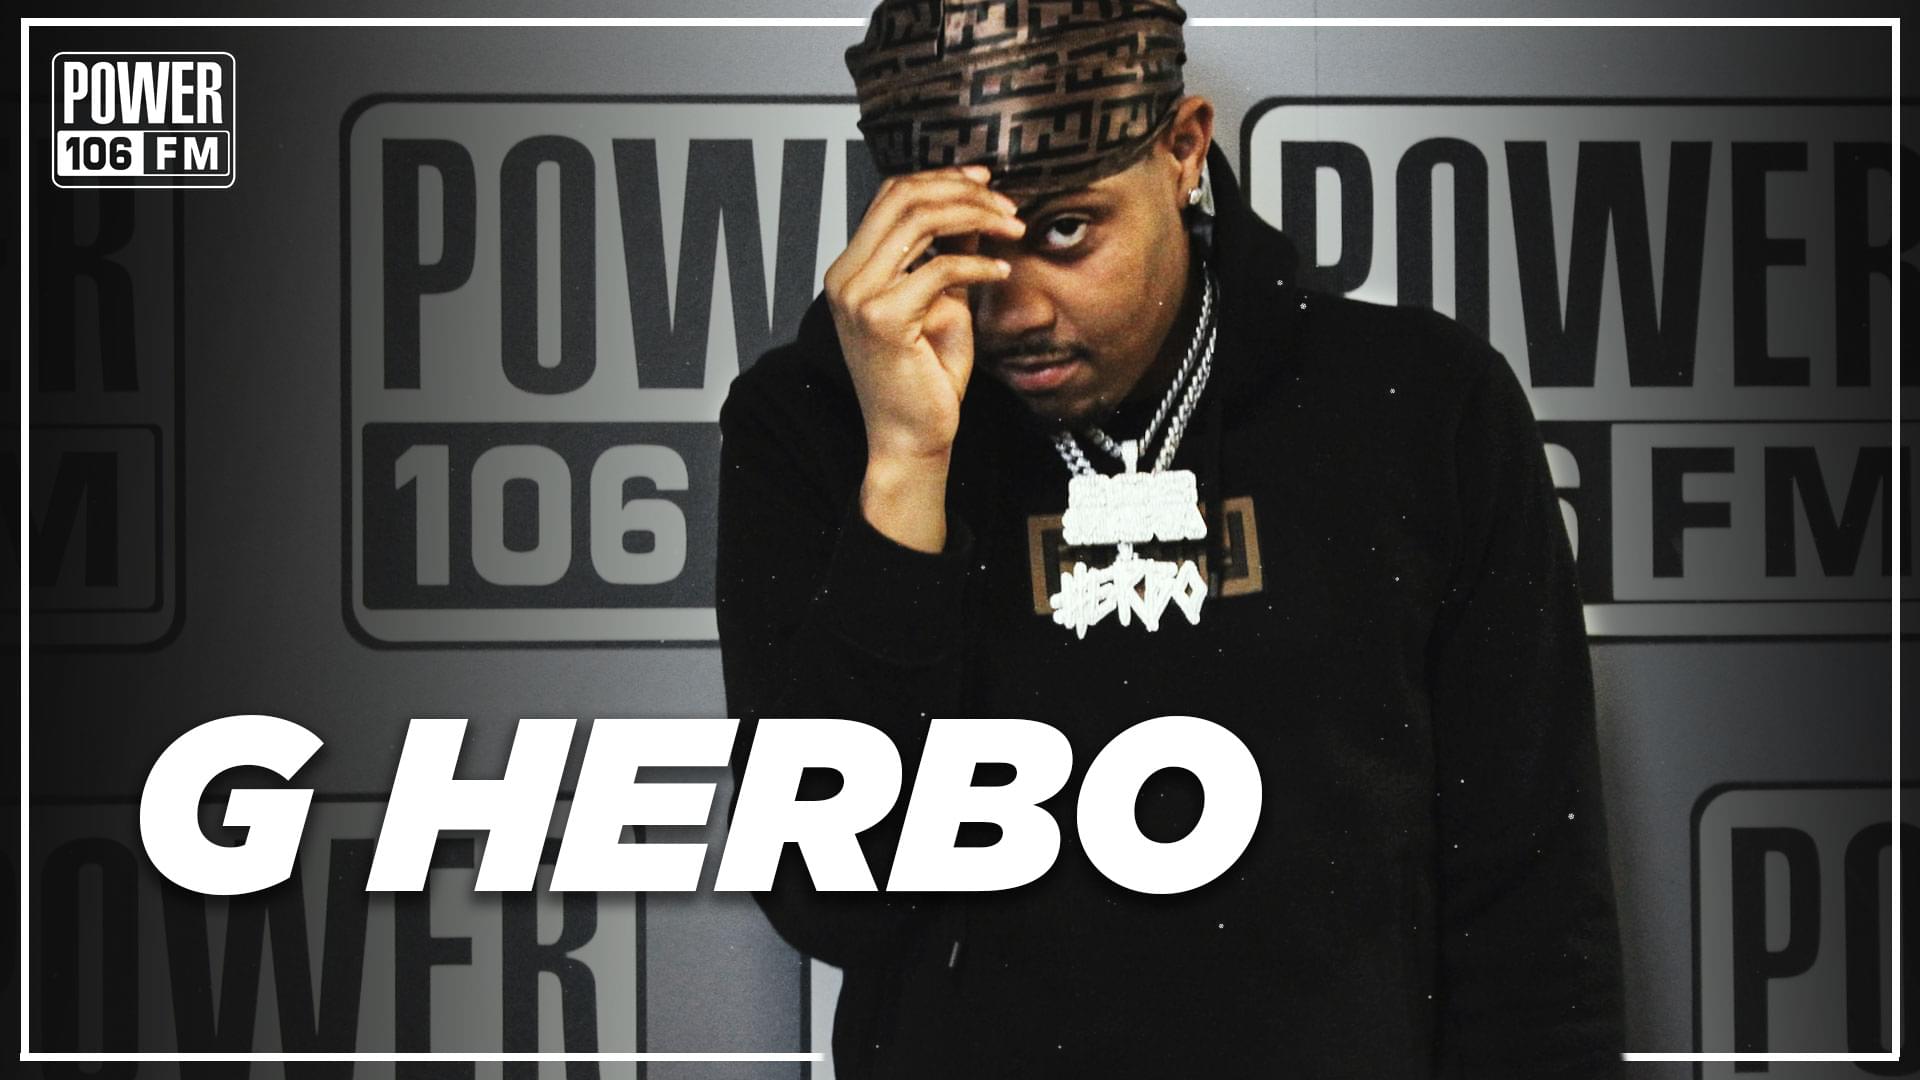 G Herbo On Being A New Father, ‘Swervo’ + Reaction to Drake DM [WATCH]